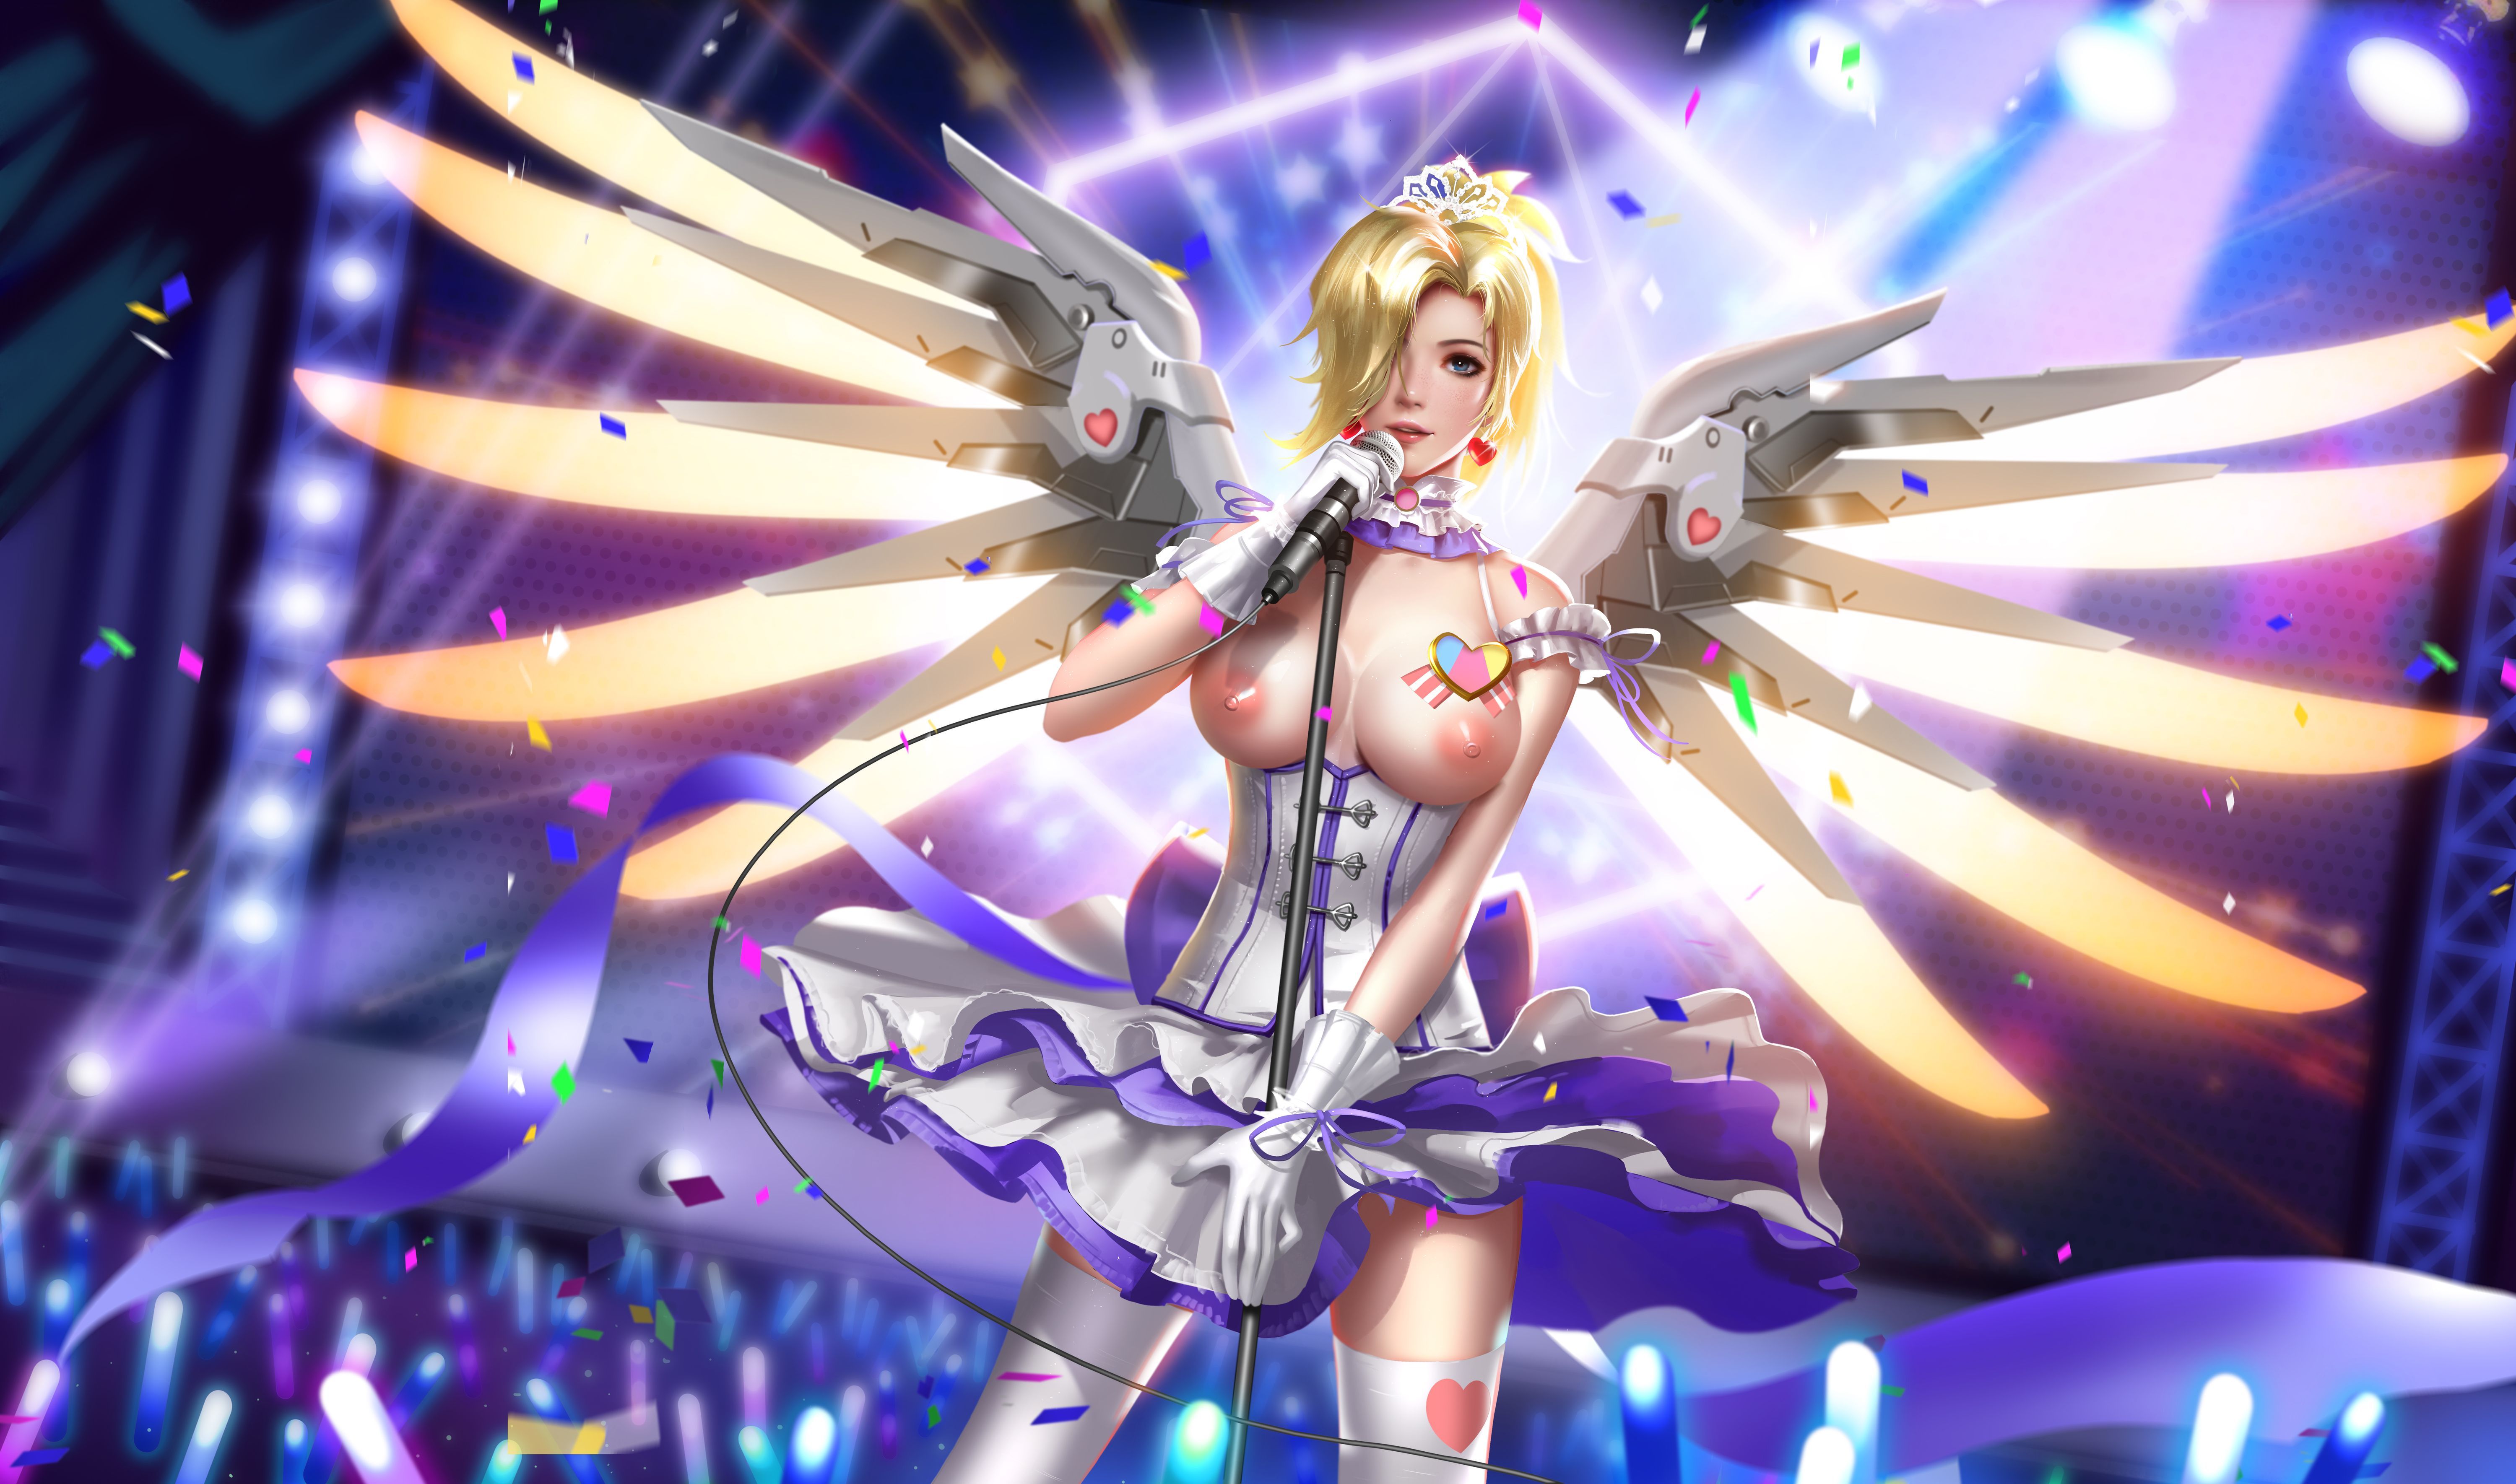 __mercy_overwatch_drawn_by_liang_xing__9bc8100944f4dd26e1c03487c6f69808